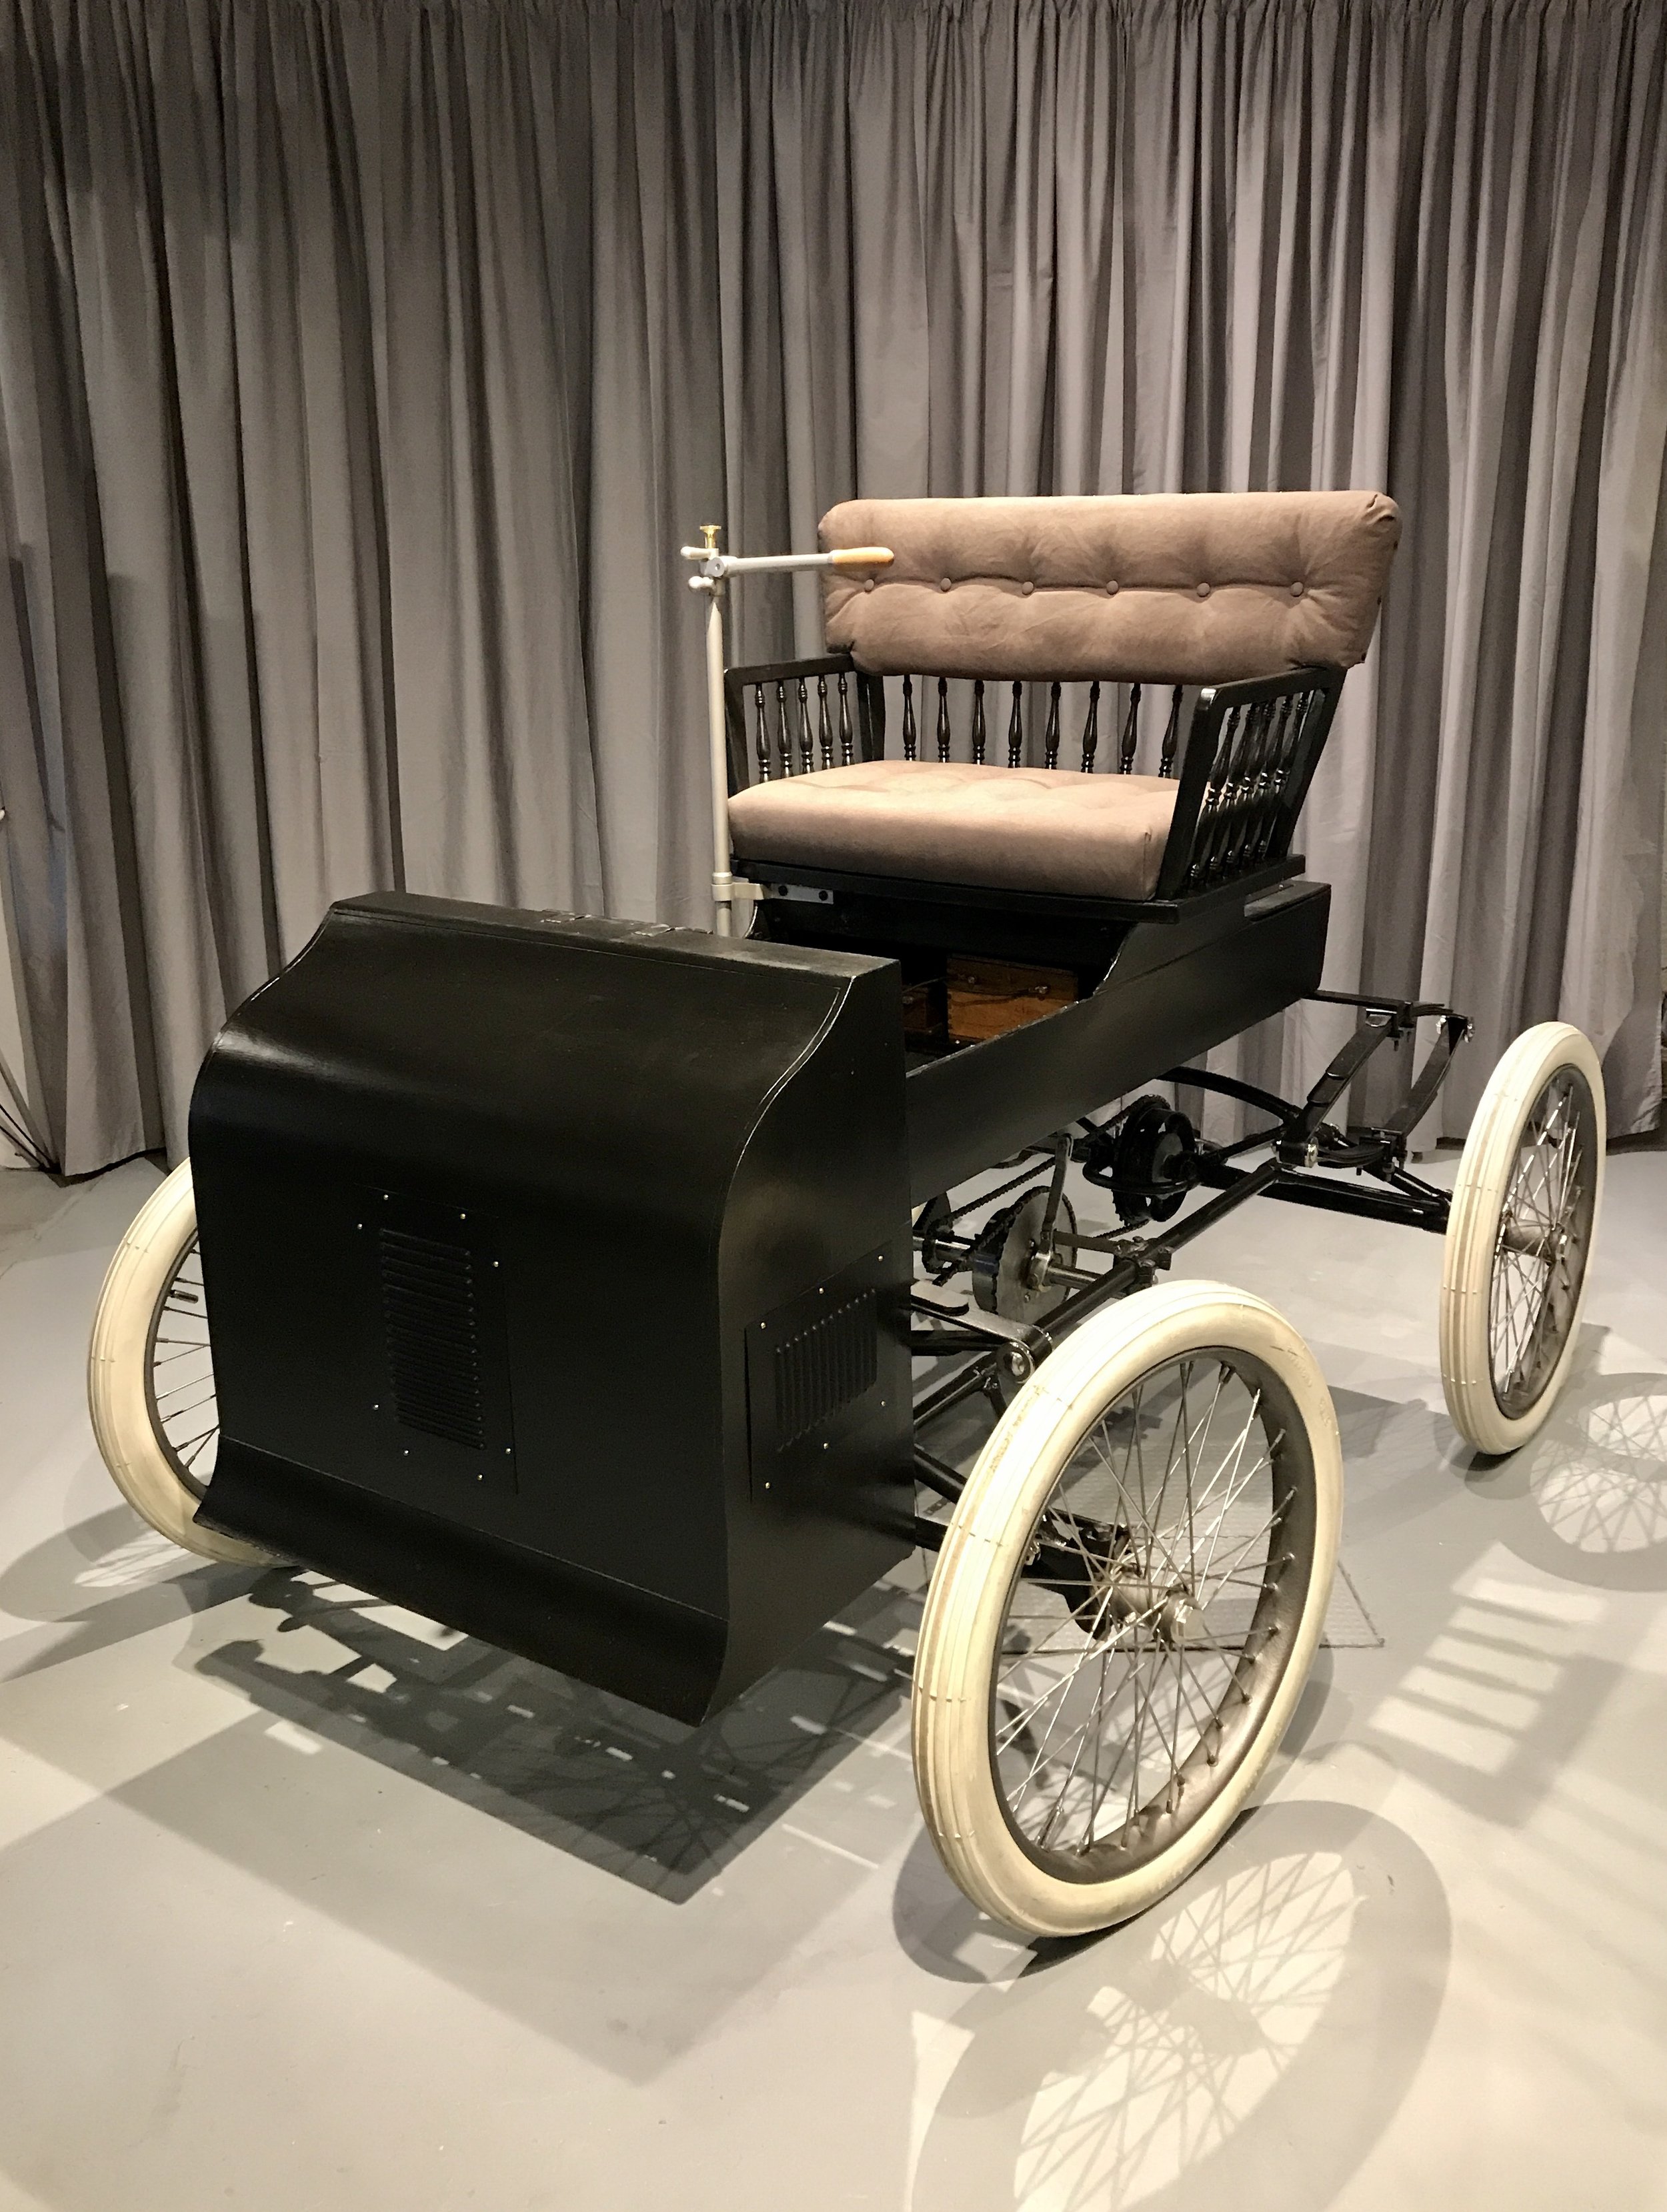  The 1897 Fossmobile replica on display at the Canadian Automotive Museum. 